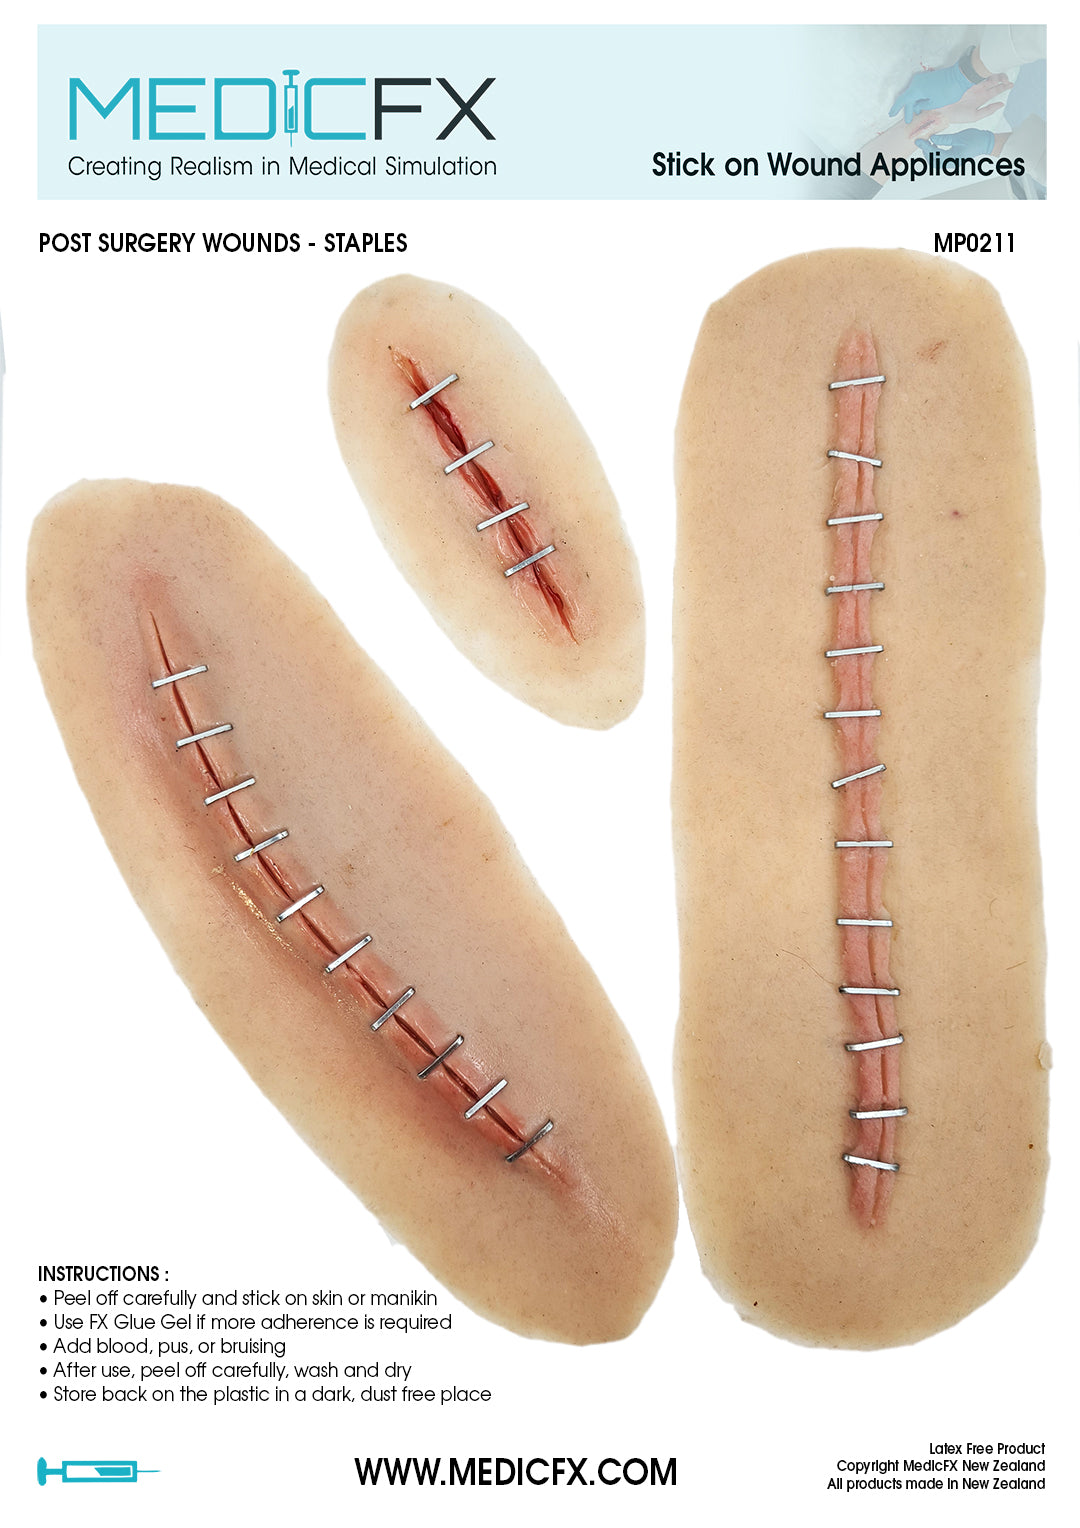 MP0211 Sheet Post Surgical Wounds Staples